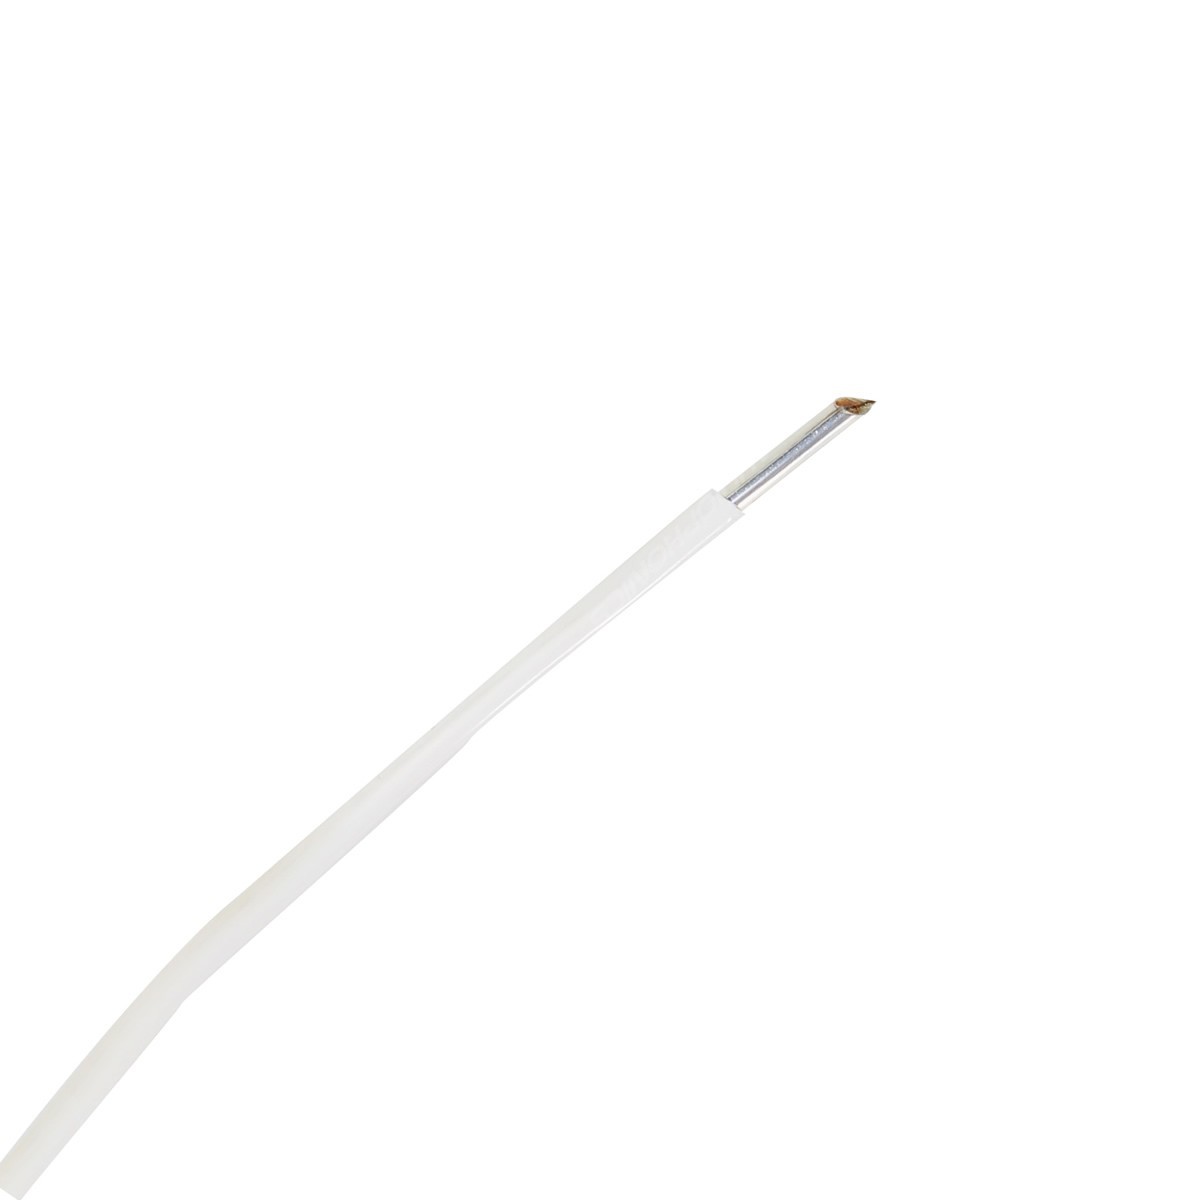 OFC Pur Copper High Purity/Silver Plated PTFE Ø 1.3mm²